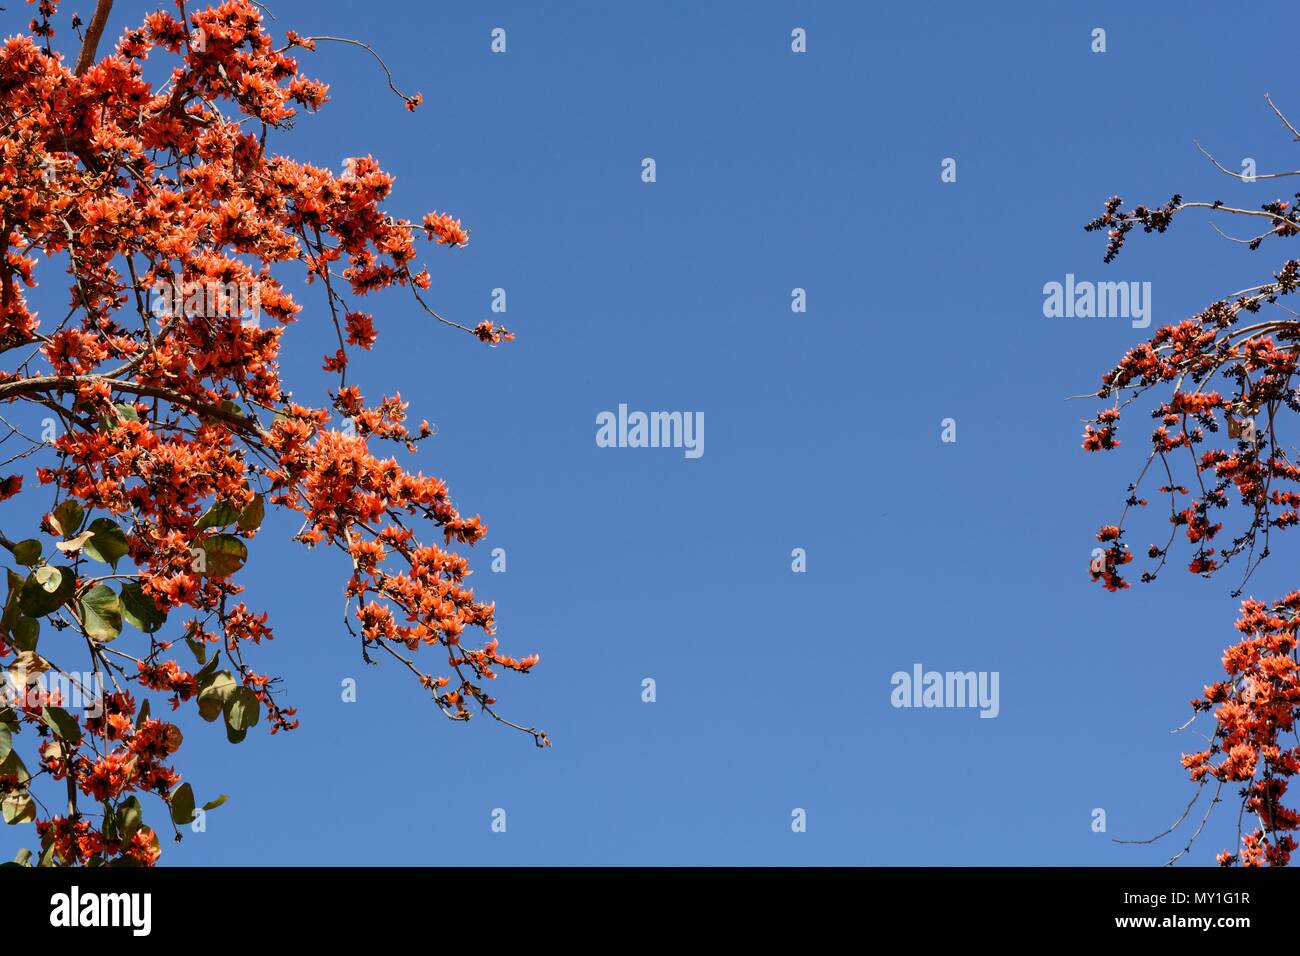 Indian Flame tree Delonix regia Gulmohar tree flowers  against a bright blue sky Rajasthan India Stock Photo